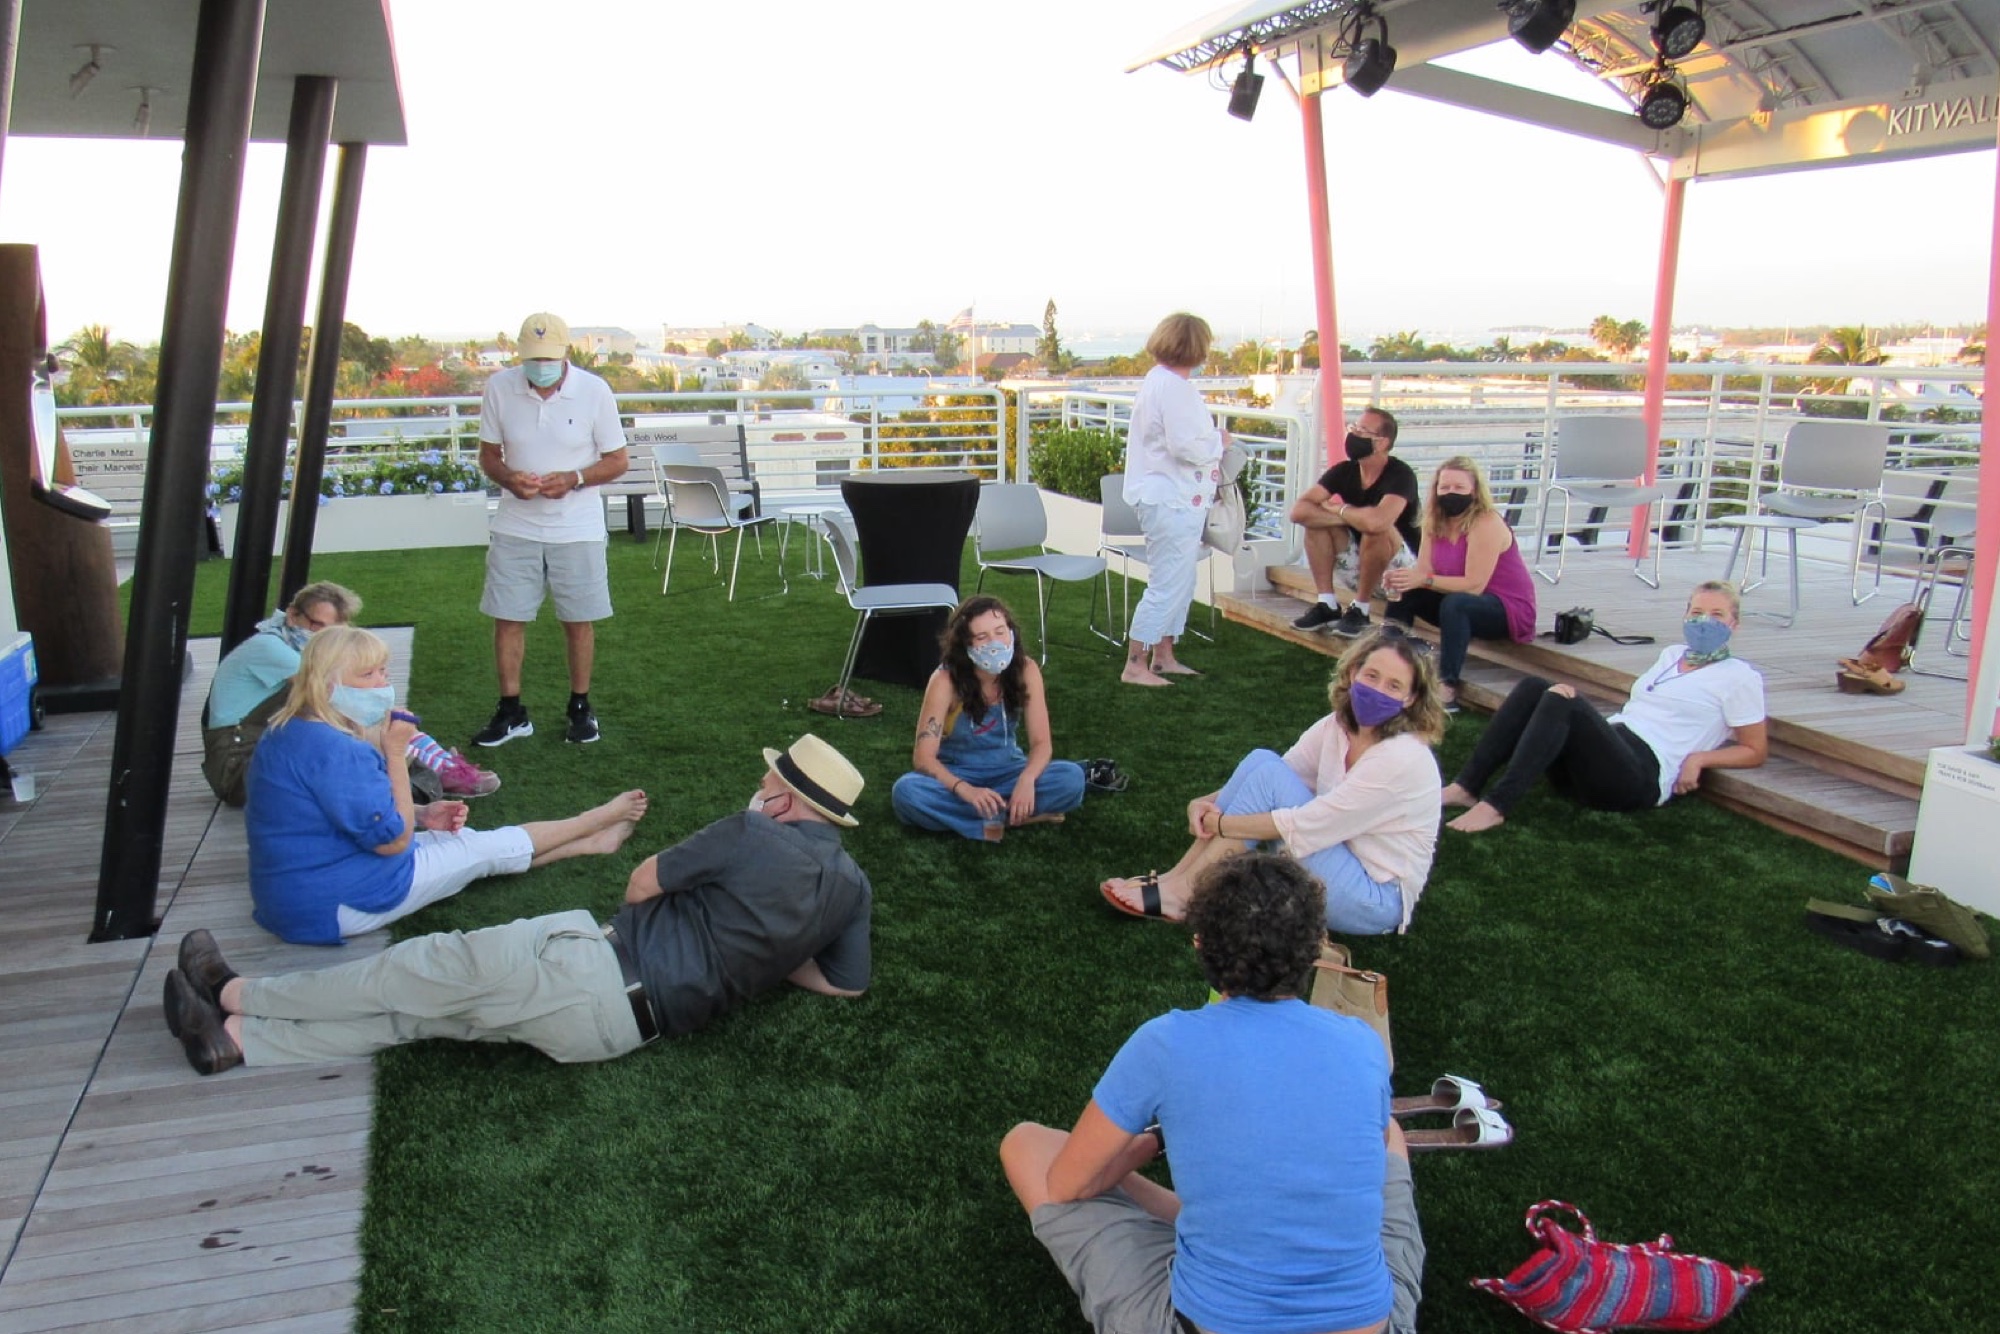 Artists, writers and staff gather on the rooftop overlooking Key West